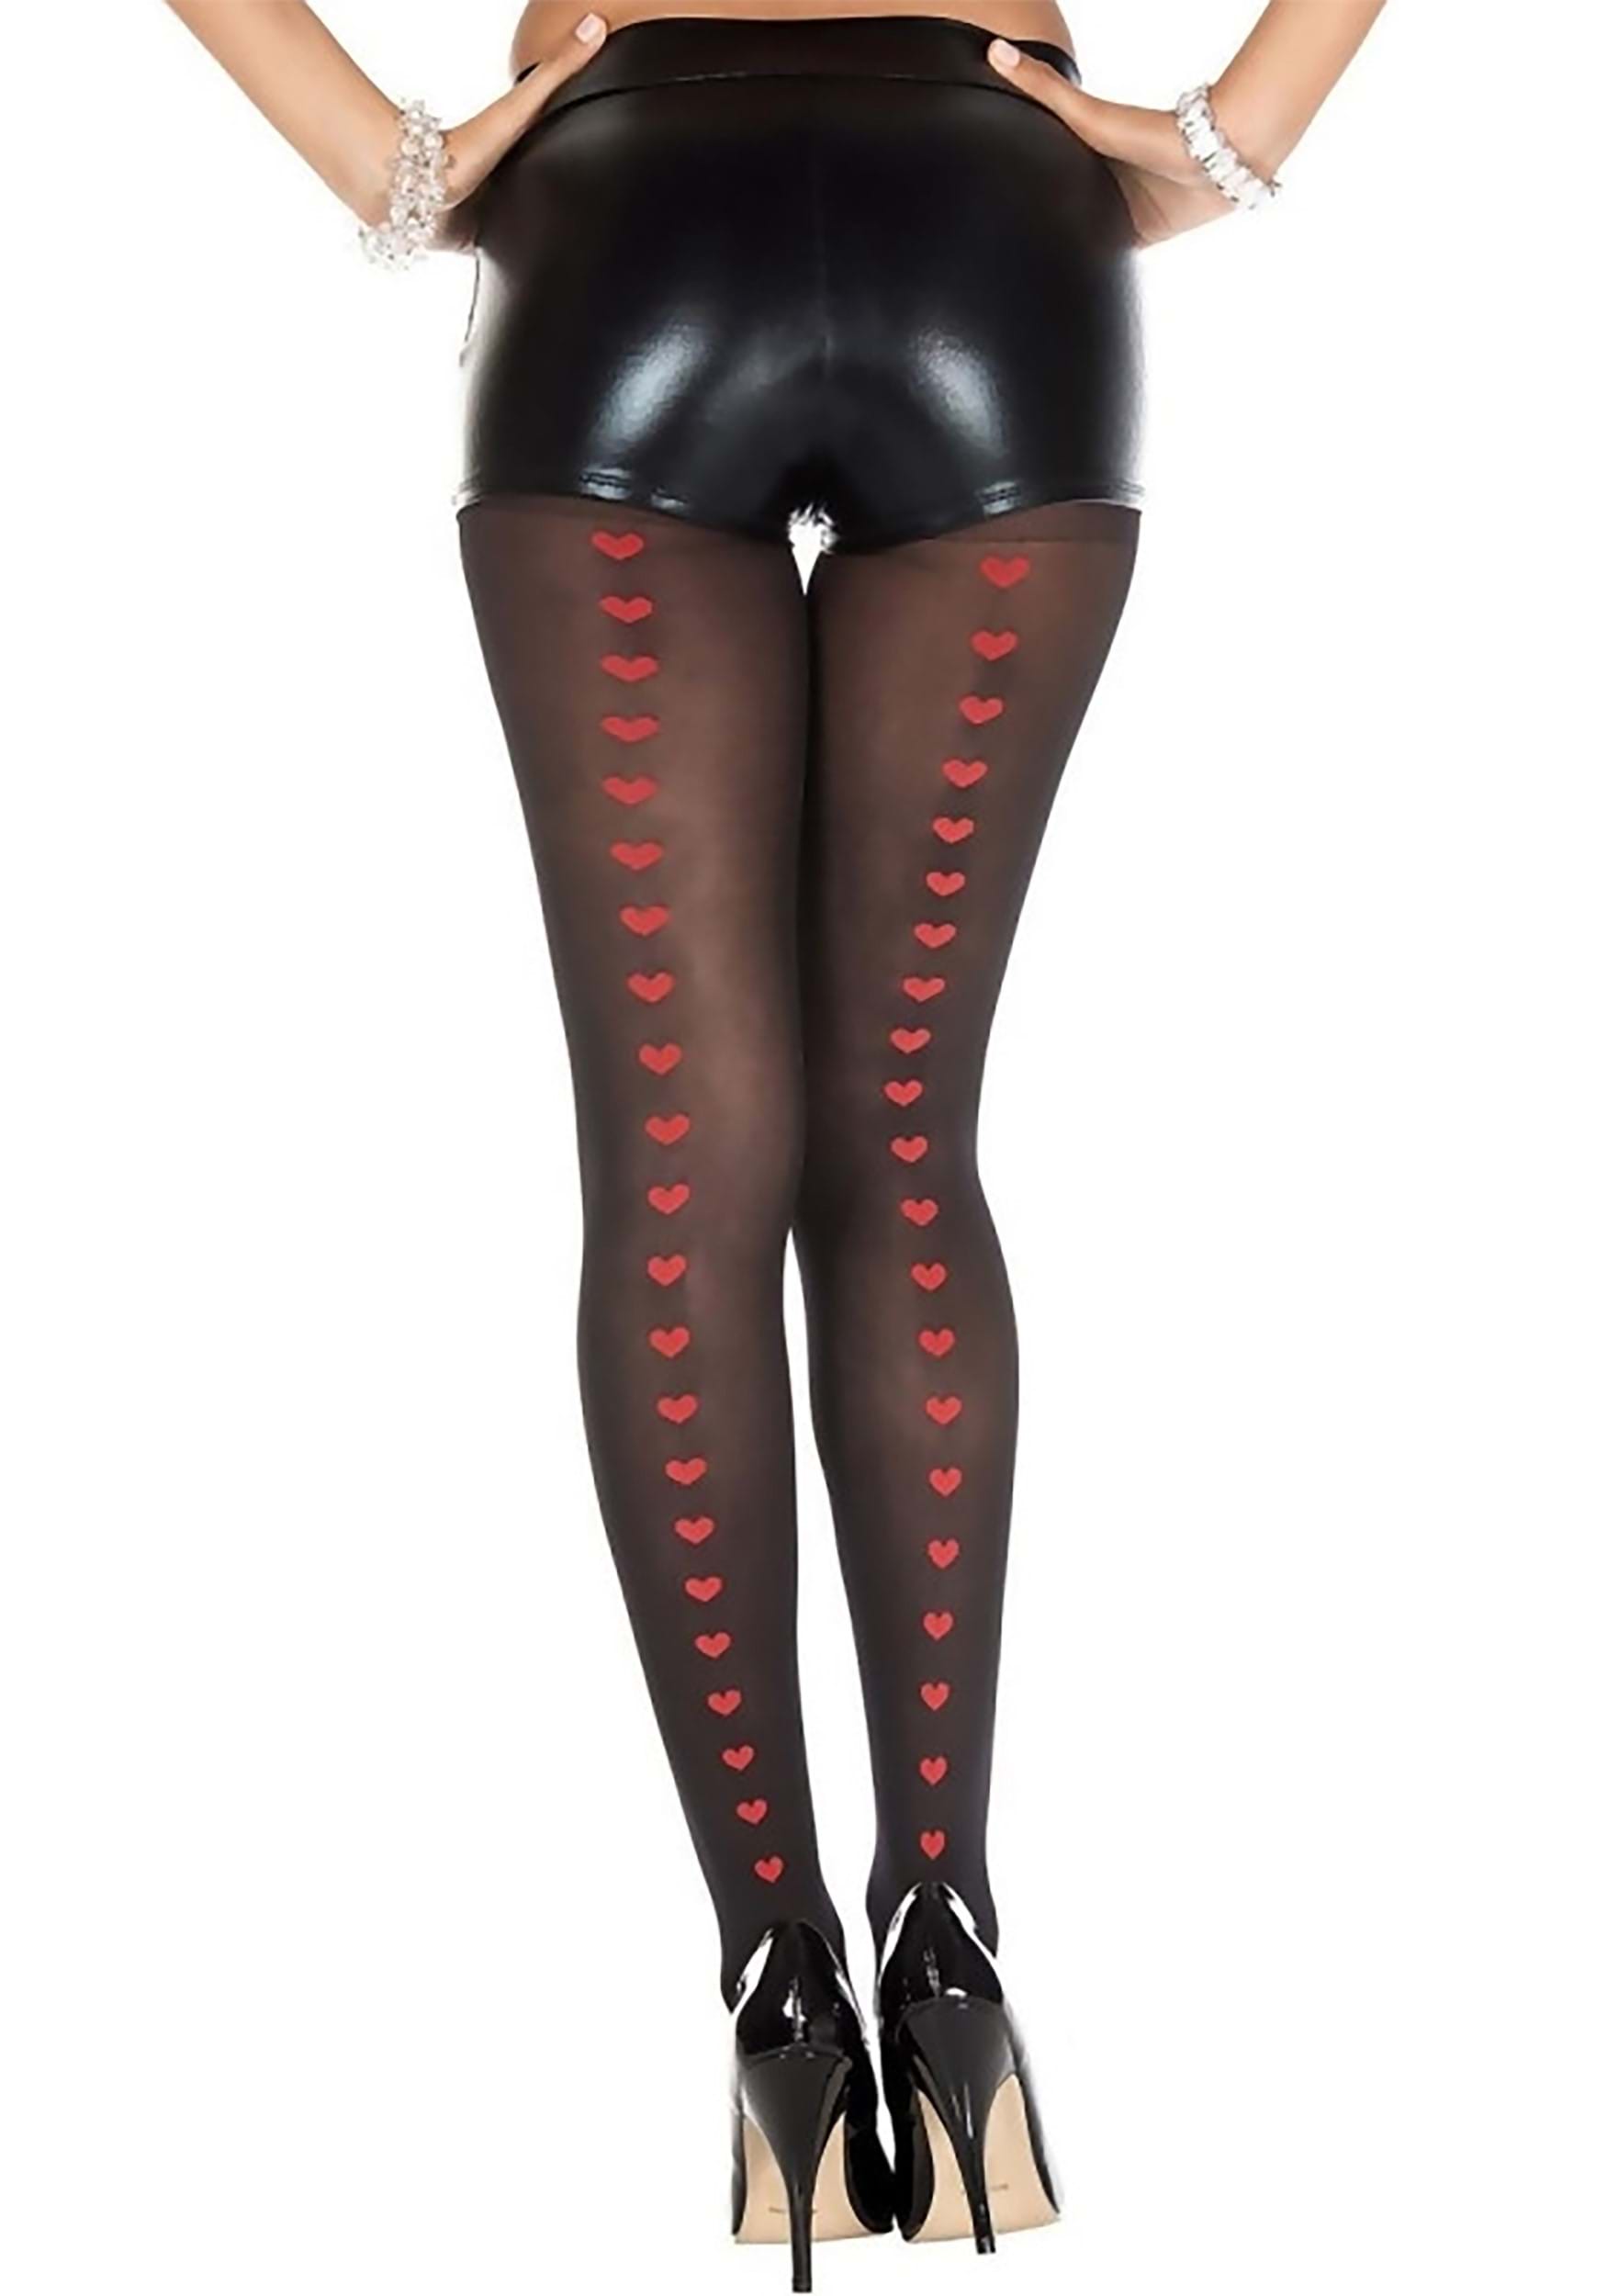 https://images.halloweencostumes.com/products/82613/1-1/heart-backseam-tights.jpg